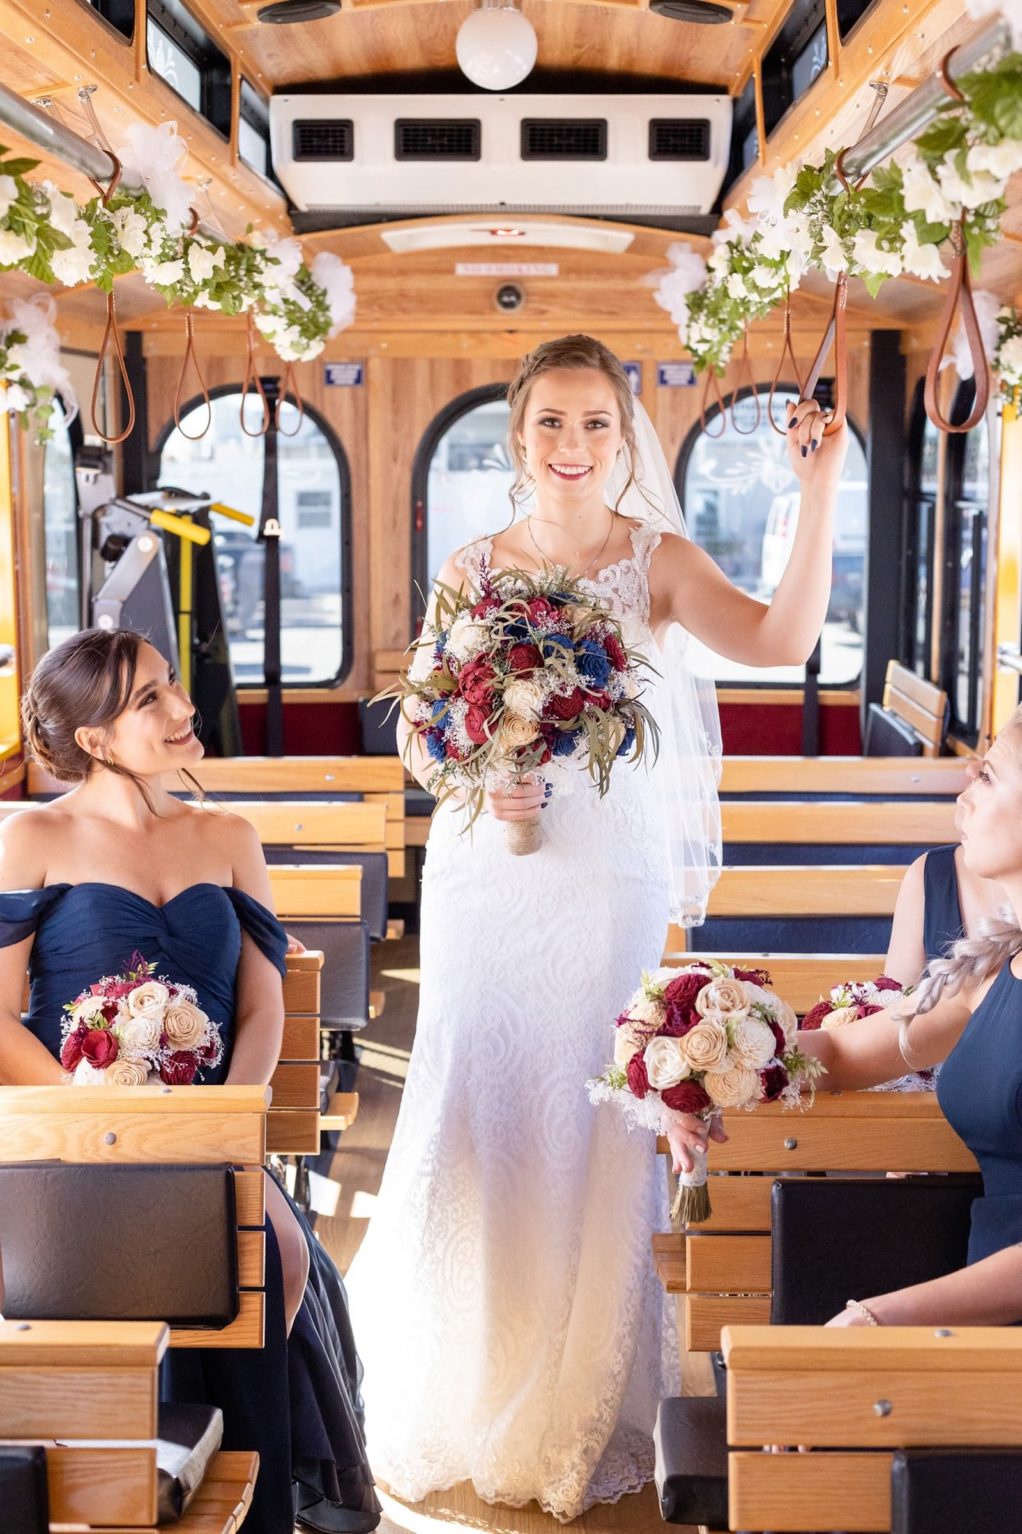 Bride and Bridesmaids on Way to Wedding on Jolley Trolley in White Lace Wedding Dress and Red, Navy, Natural Floral Bouquet